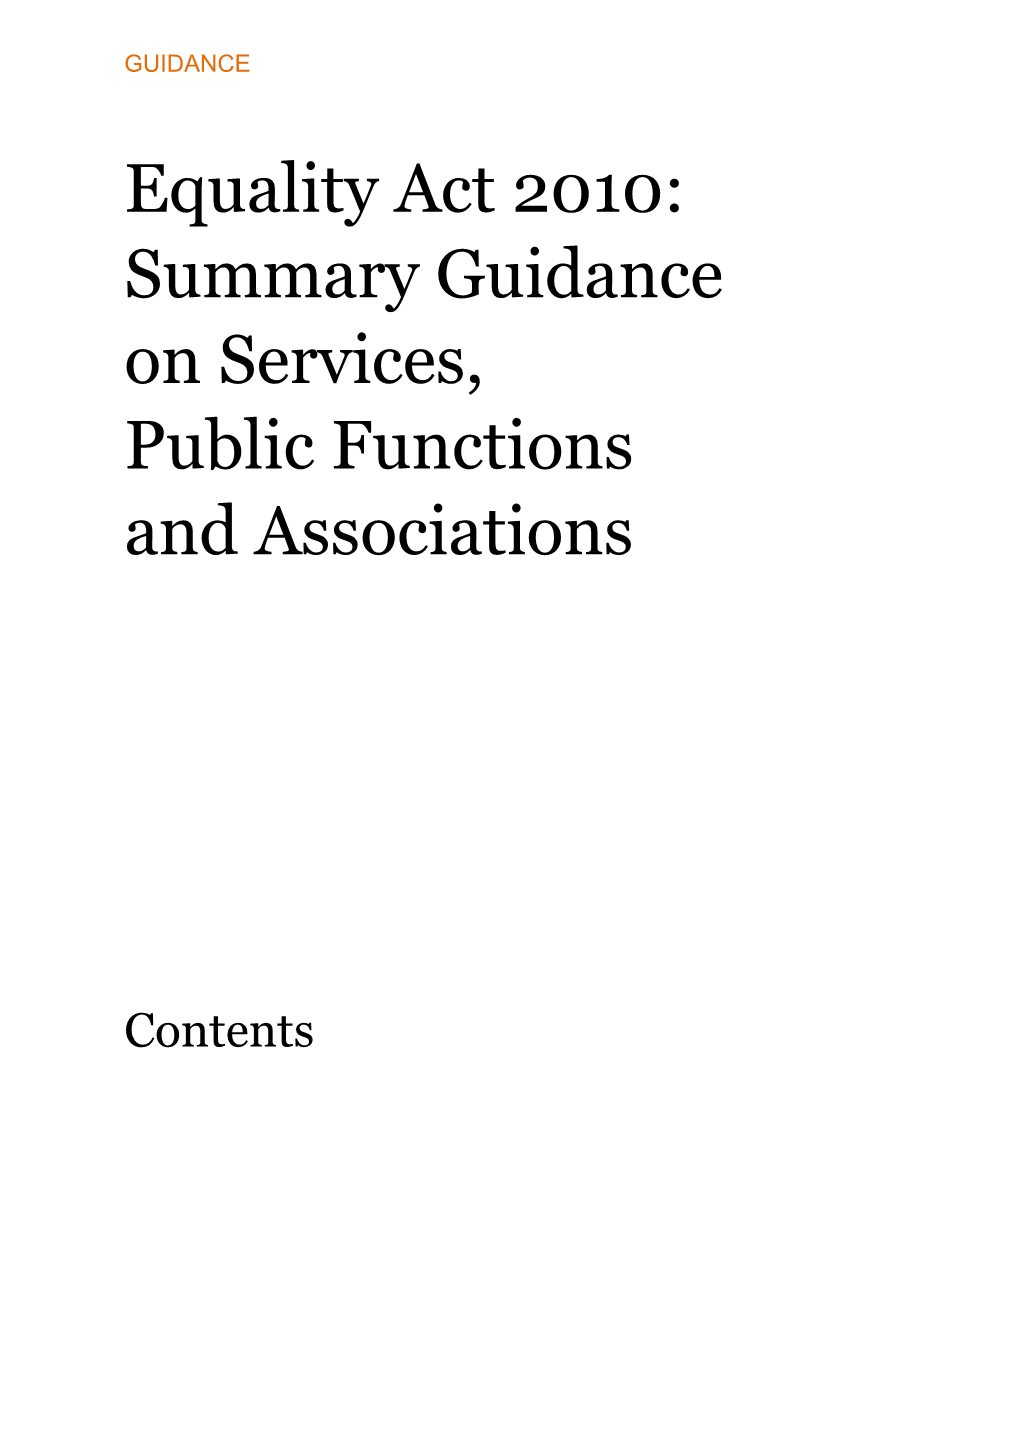 Equality Act 2010 - Summary Guidance on Services, Public Functions and Associations (Msword2003)